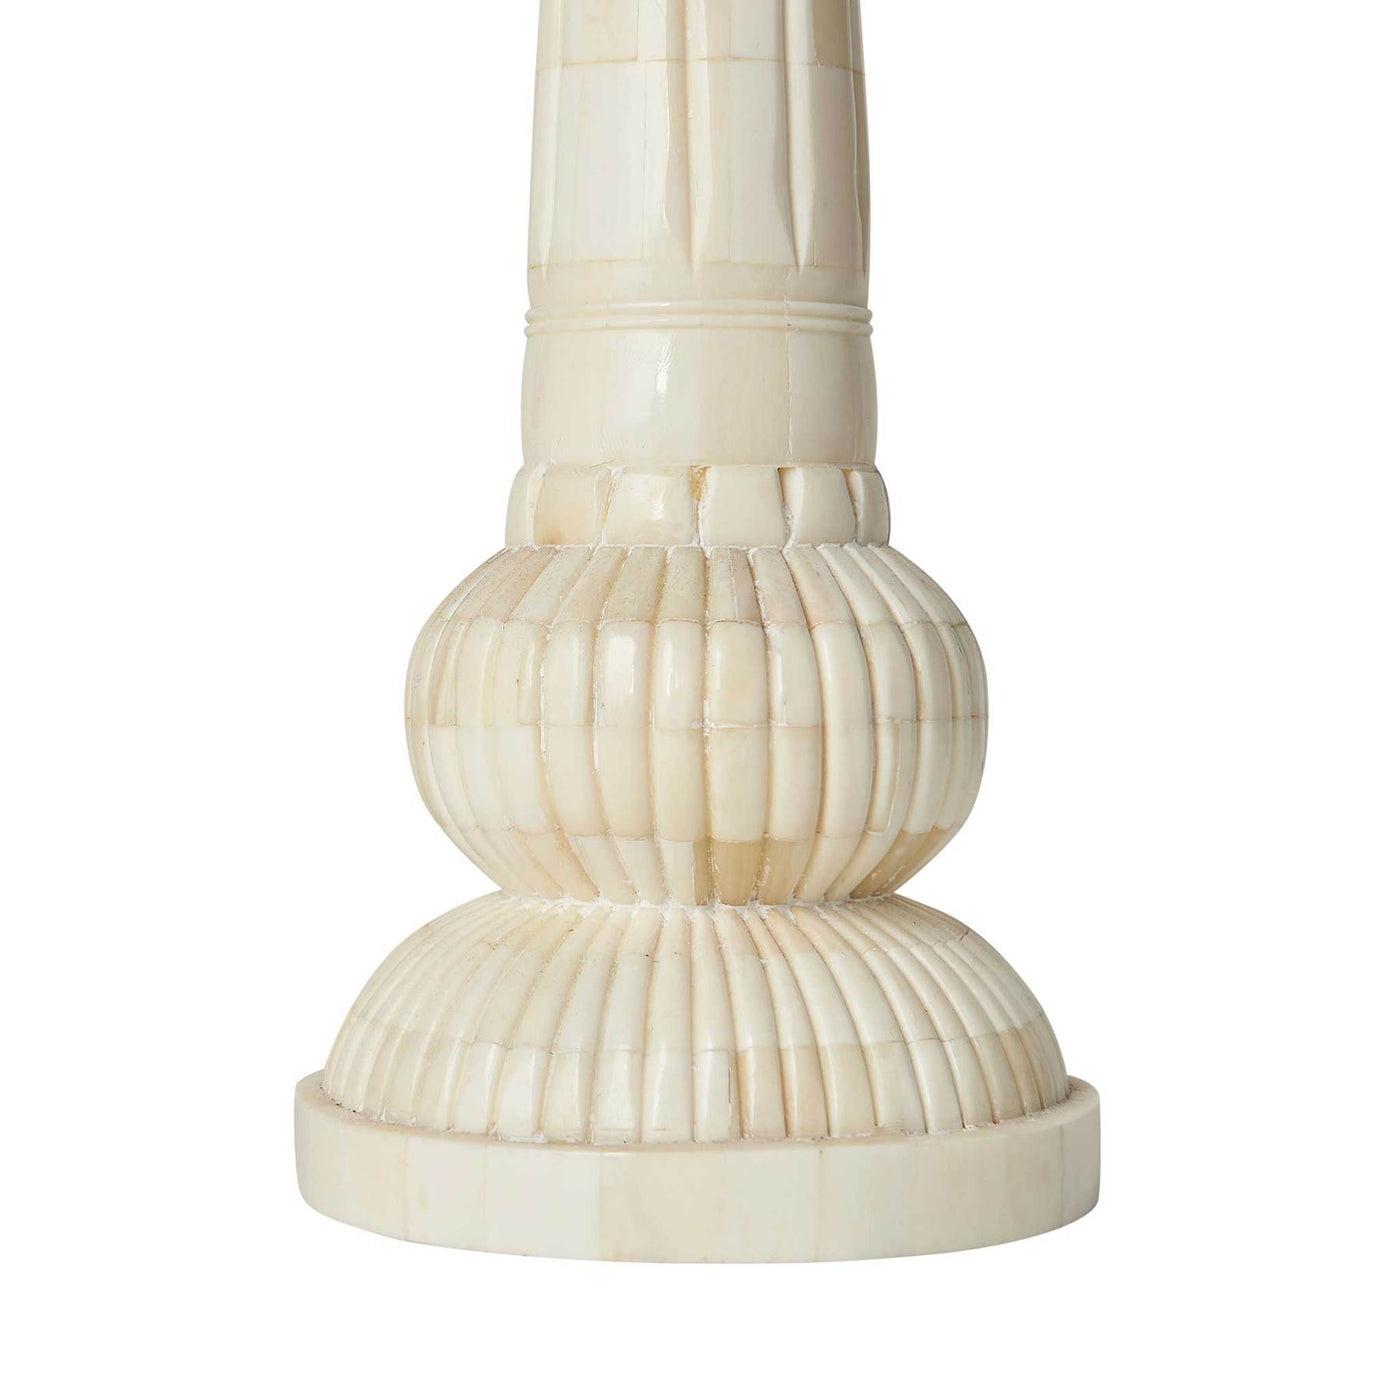 A Shree Baba Bone Inlay Lamp by Penny Morrison  | Newport Lamp And Shade | Located in Newport, RI